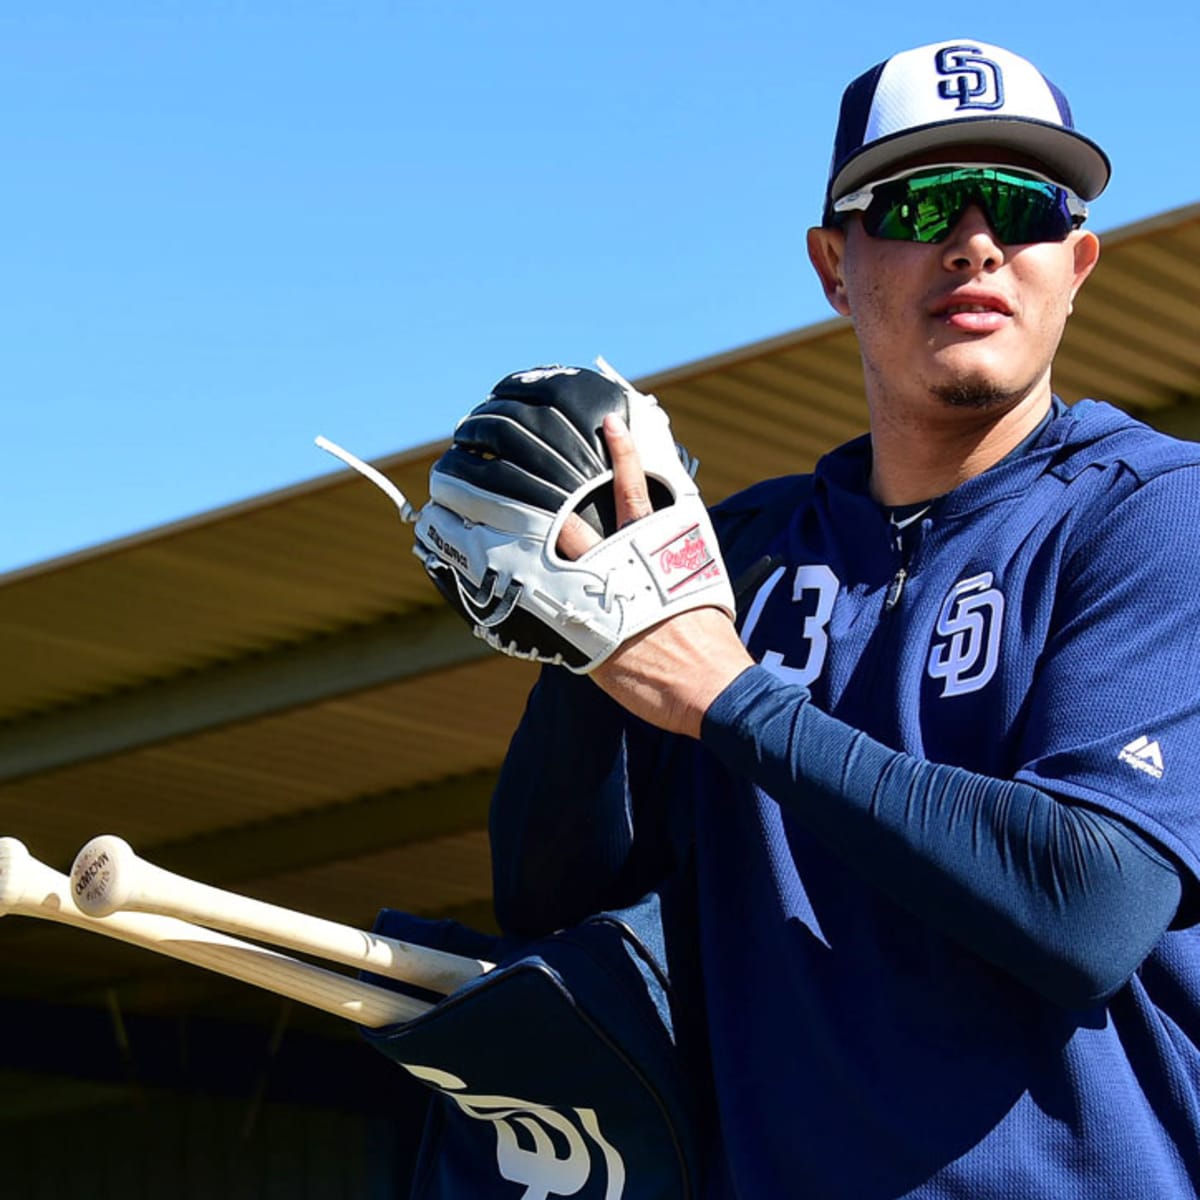 Manny Machado signs with Padres: Here's what his new jersey looks